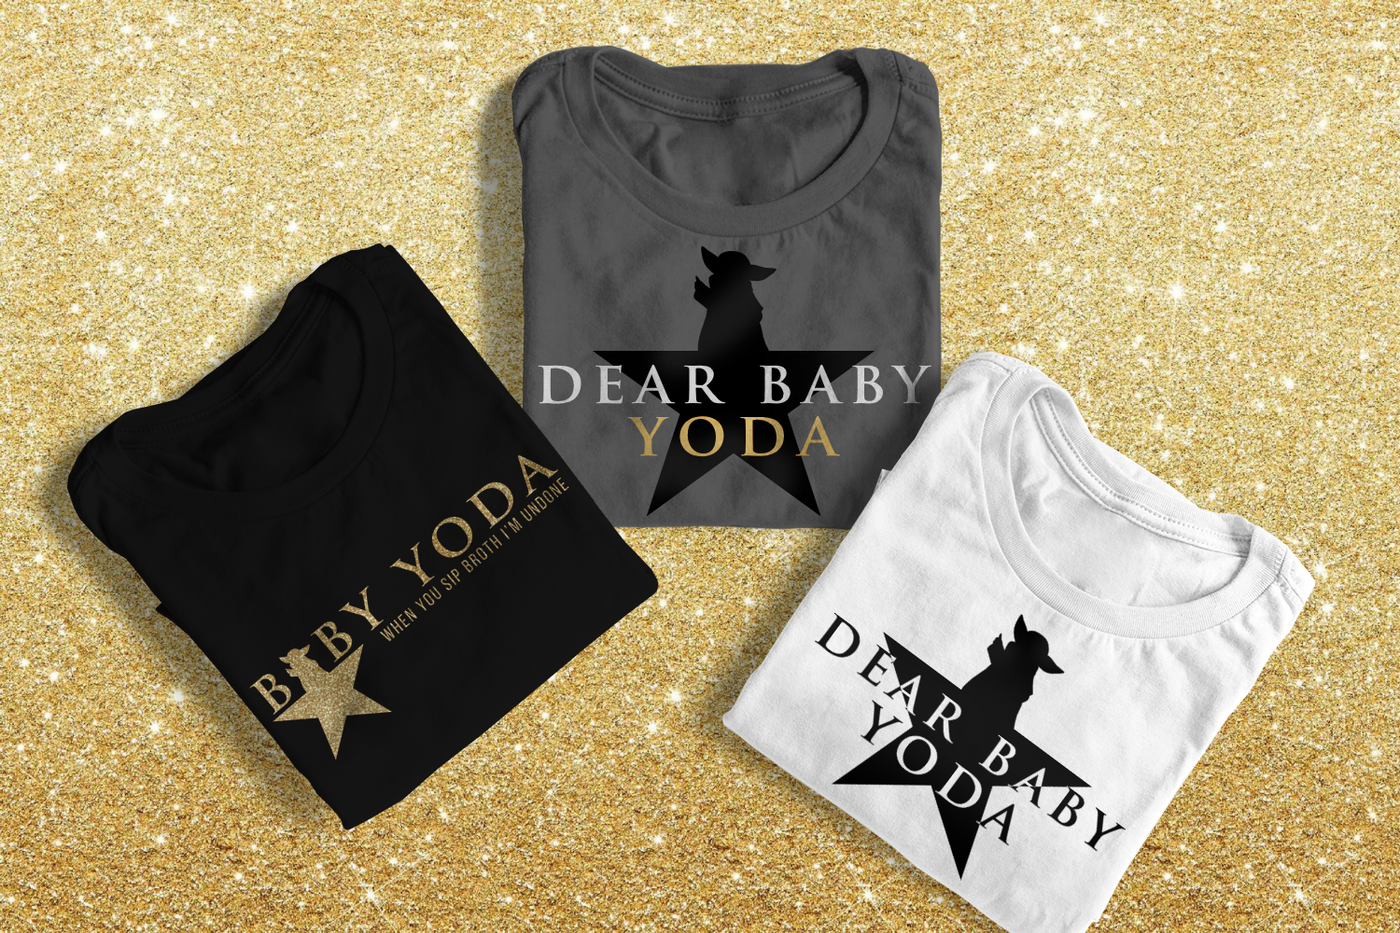 Three folded tees. Two have a star where a baby alien is the top of the star and the words "Dear baby Yoda" across it. The third tee has the same star with the word "Baby Yoda" and the star makes the first A. Under the words it says "when you sip broth I'm undone."